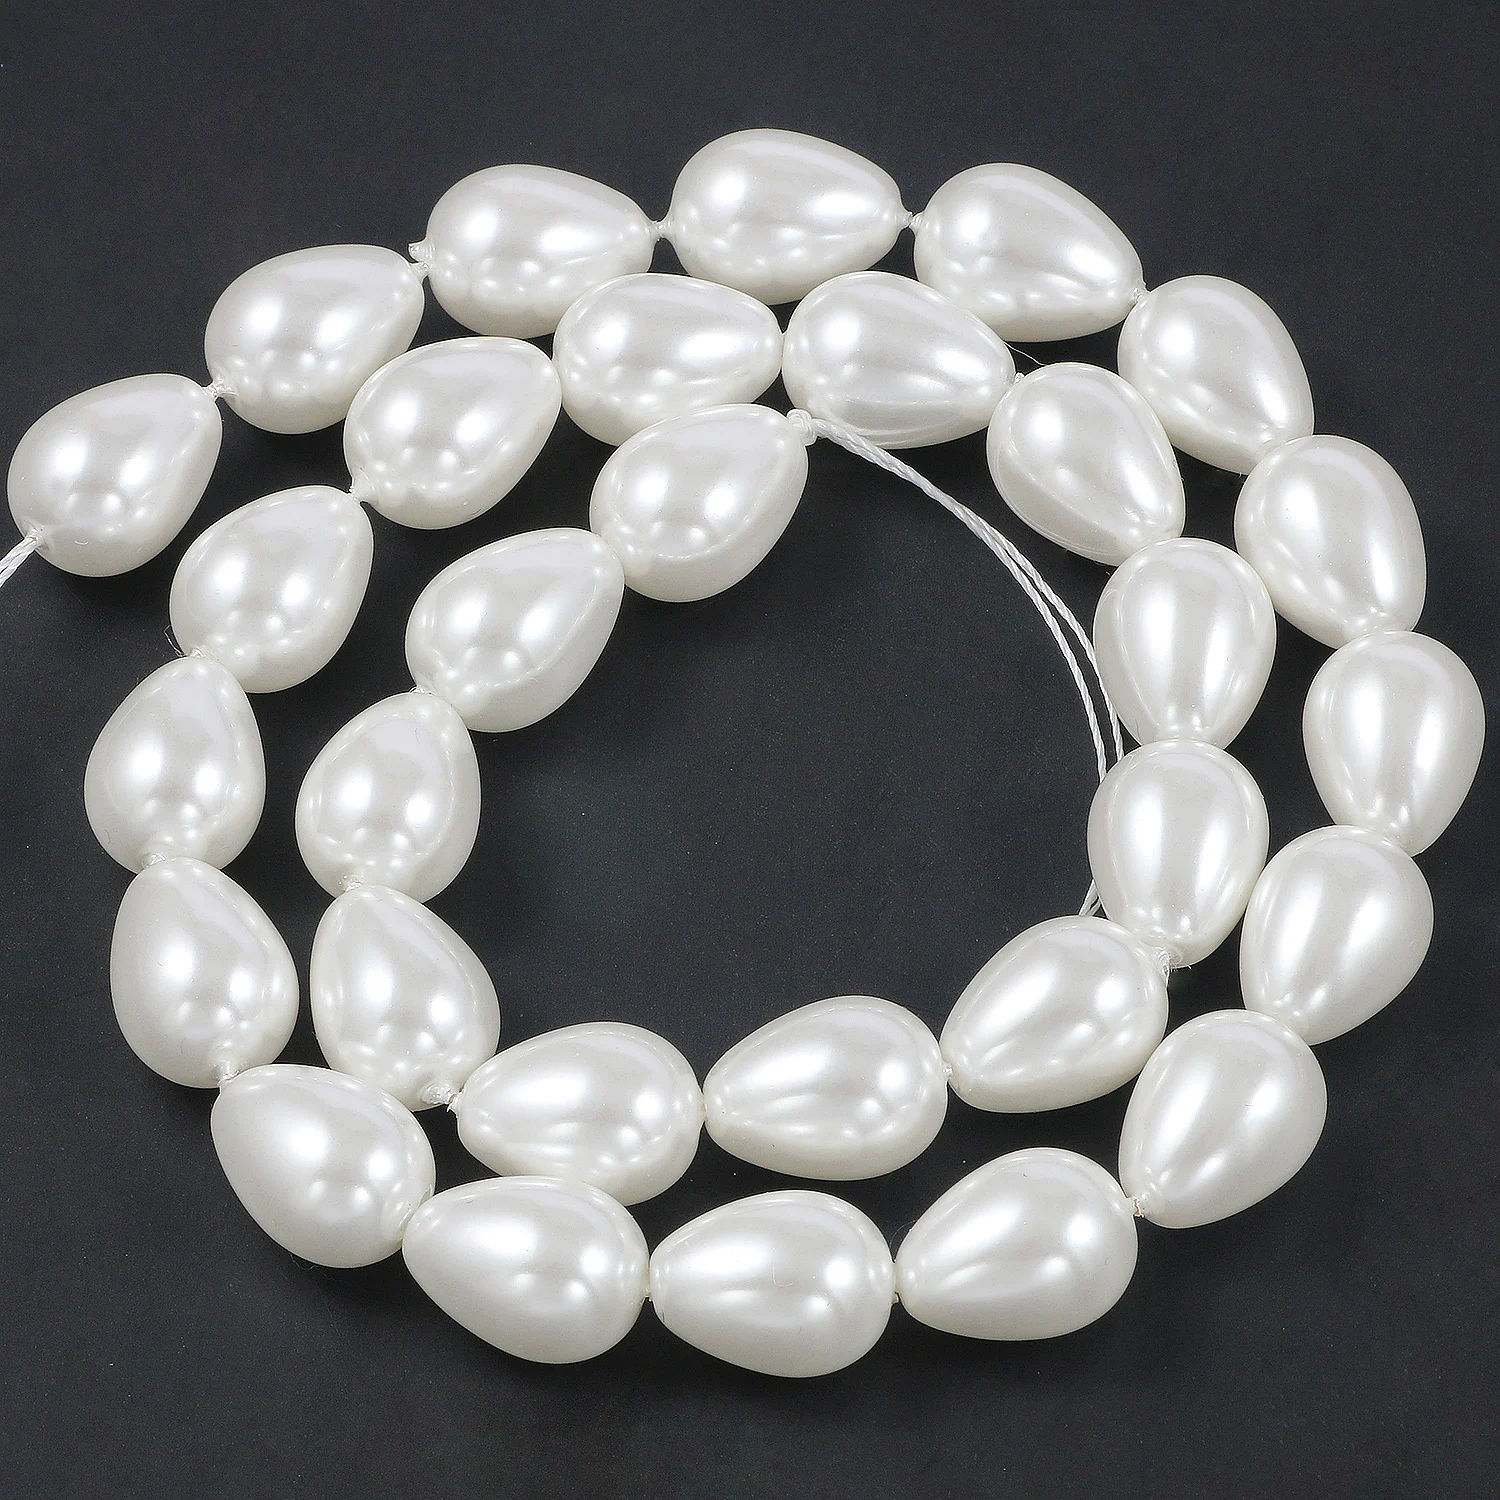 110pcs Beads 8mm Dark Grey Color Imitation Acrylic Loose Round Pearl Spacer 